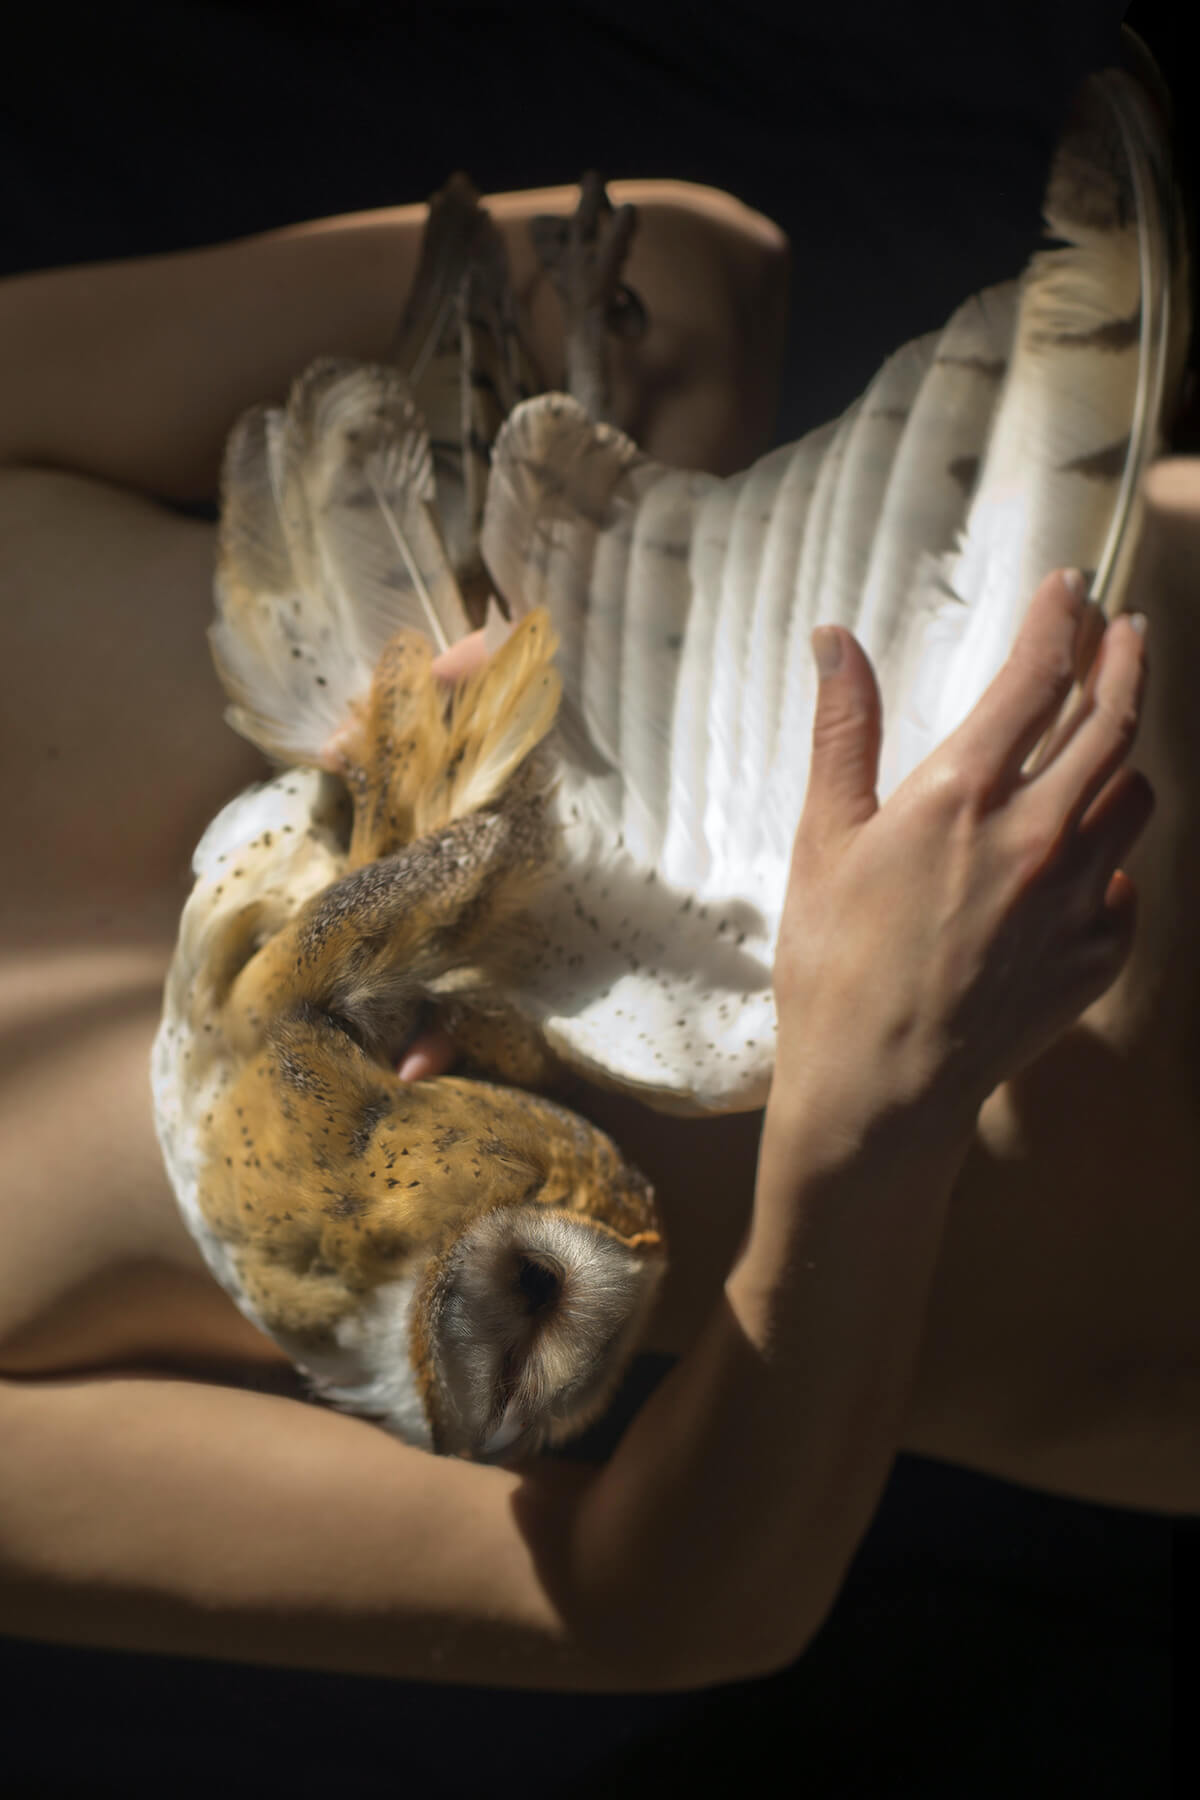 A photograph, dramatically lit, in which a white woman's naked torso is seen cradling in her arms the body of a light brown and white owl, with its white-feathered wing extended downward.